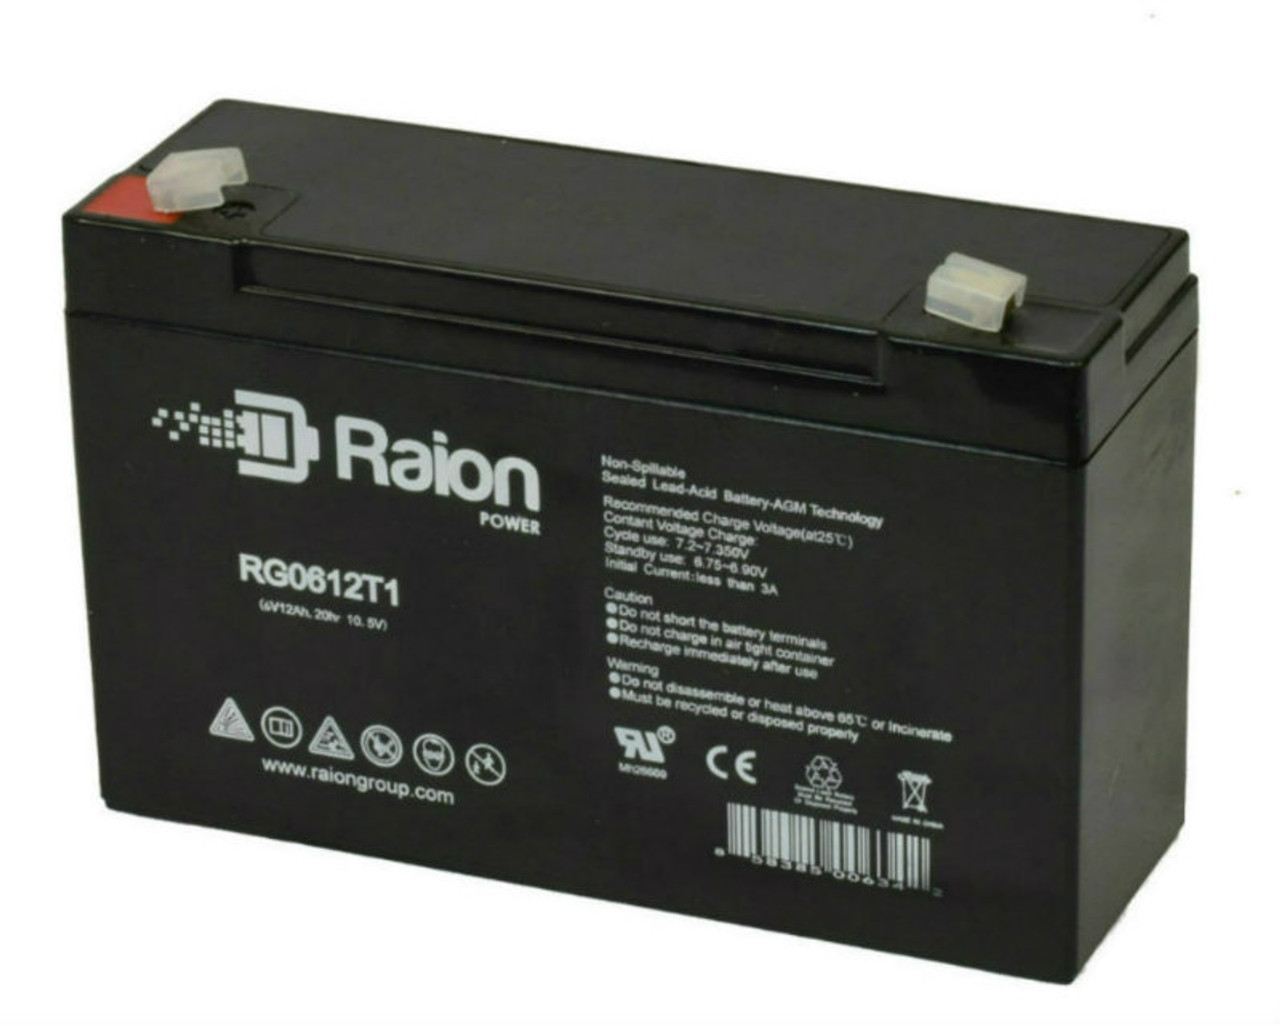 Raion Power RG06120T1 Replacement 6V 12Ah Emergency Light Battery for Hubbell 12-727